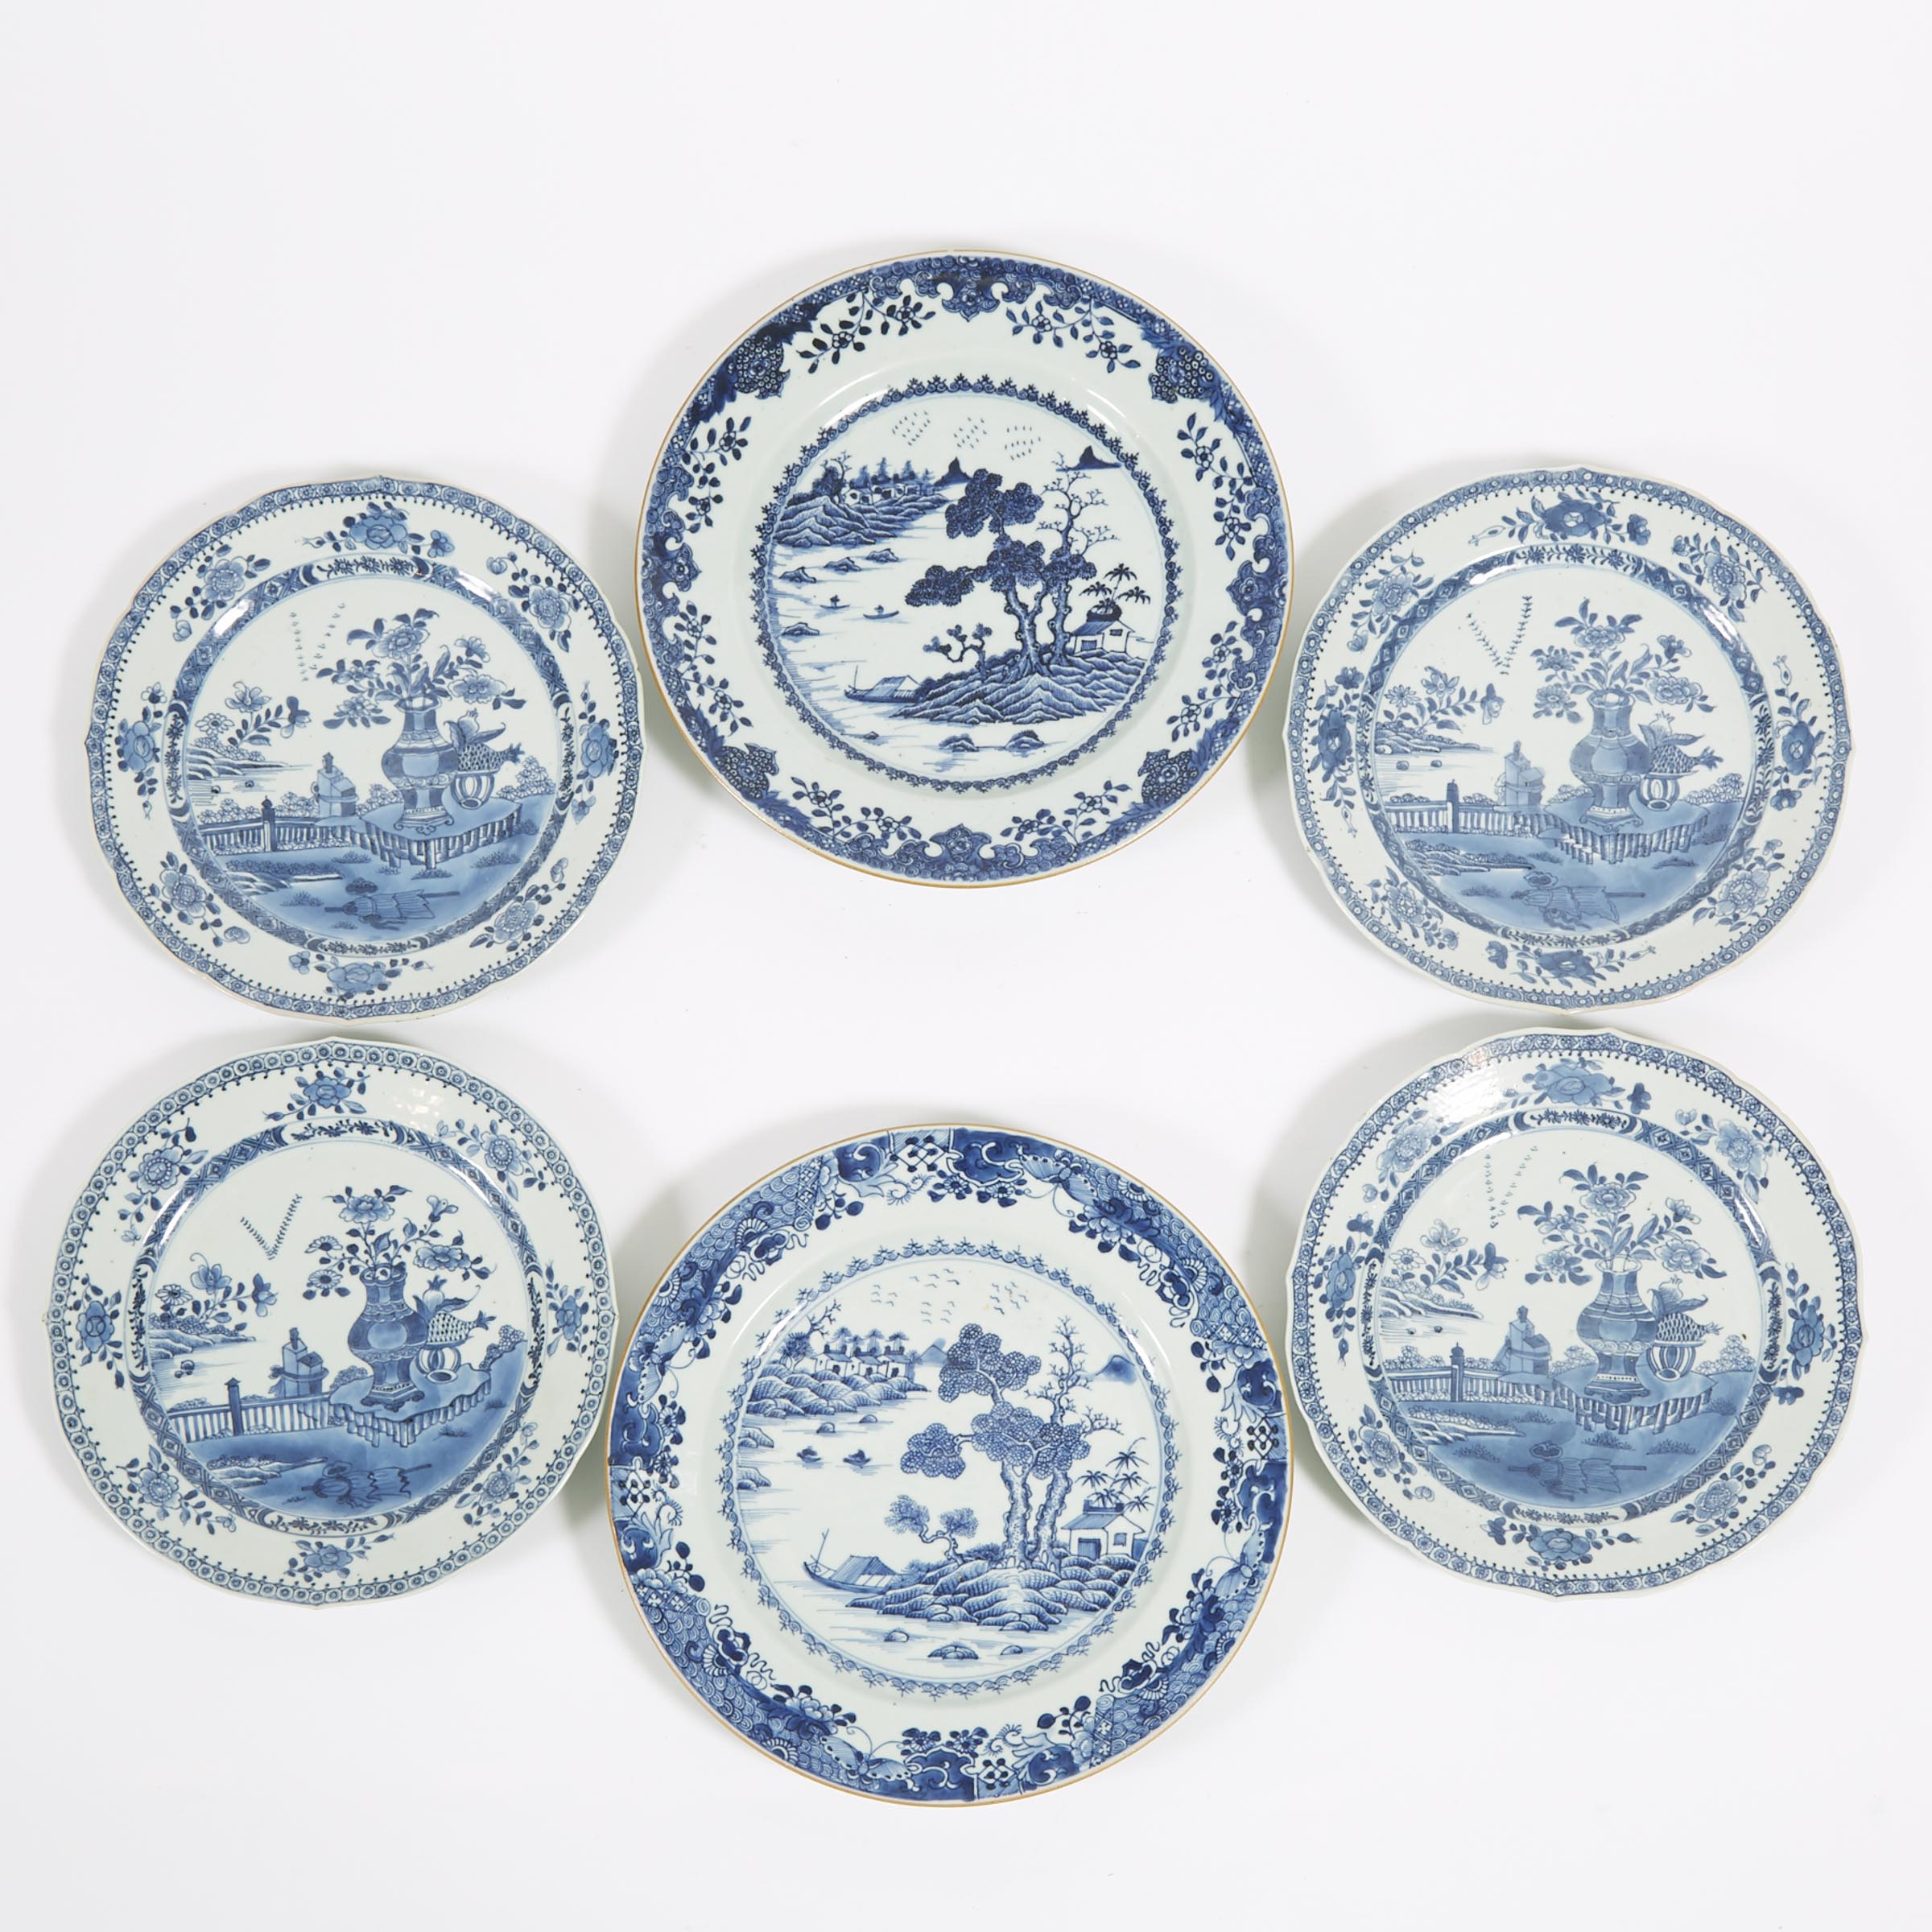 A Set of Four 'Flying Geese' Lobed Plates, Together With a Pair of 'Landscape' Plates, 18th Century